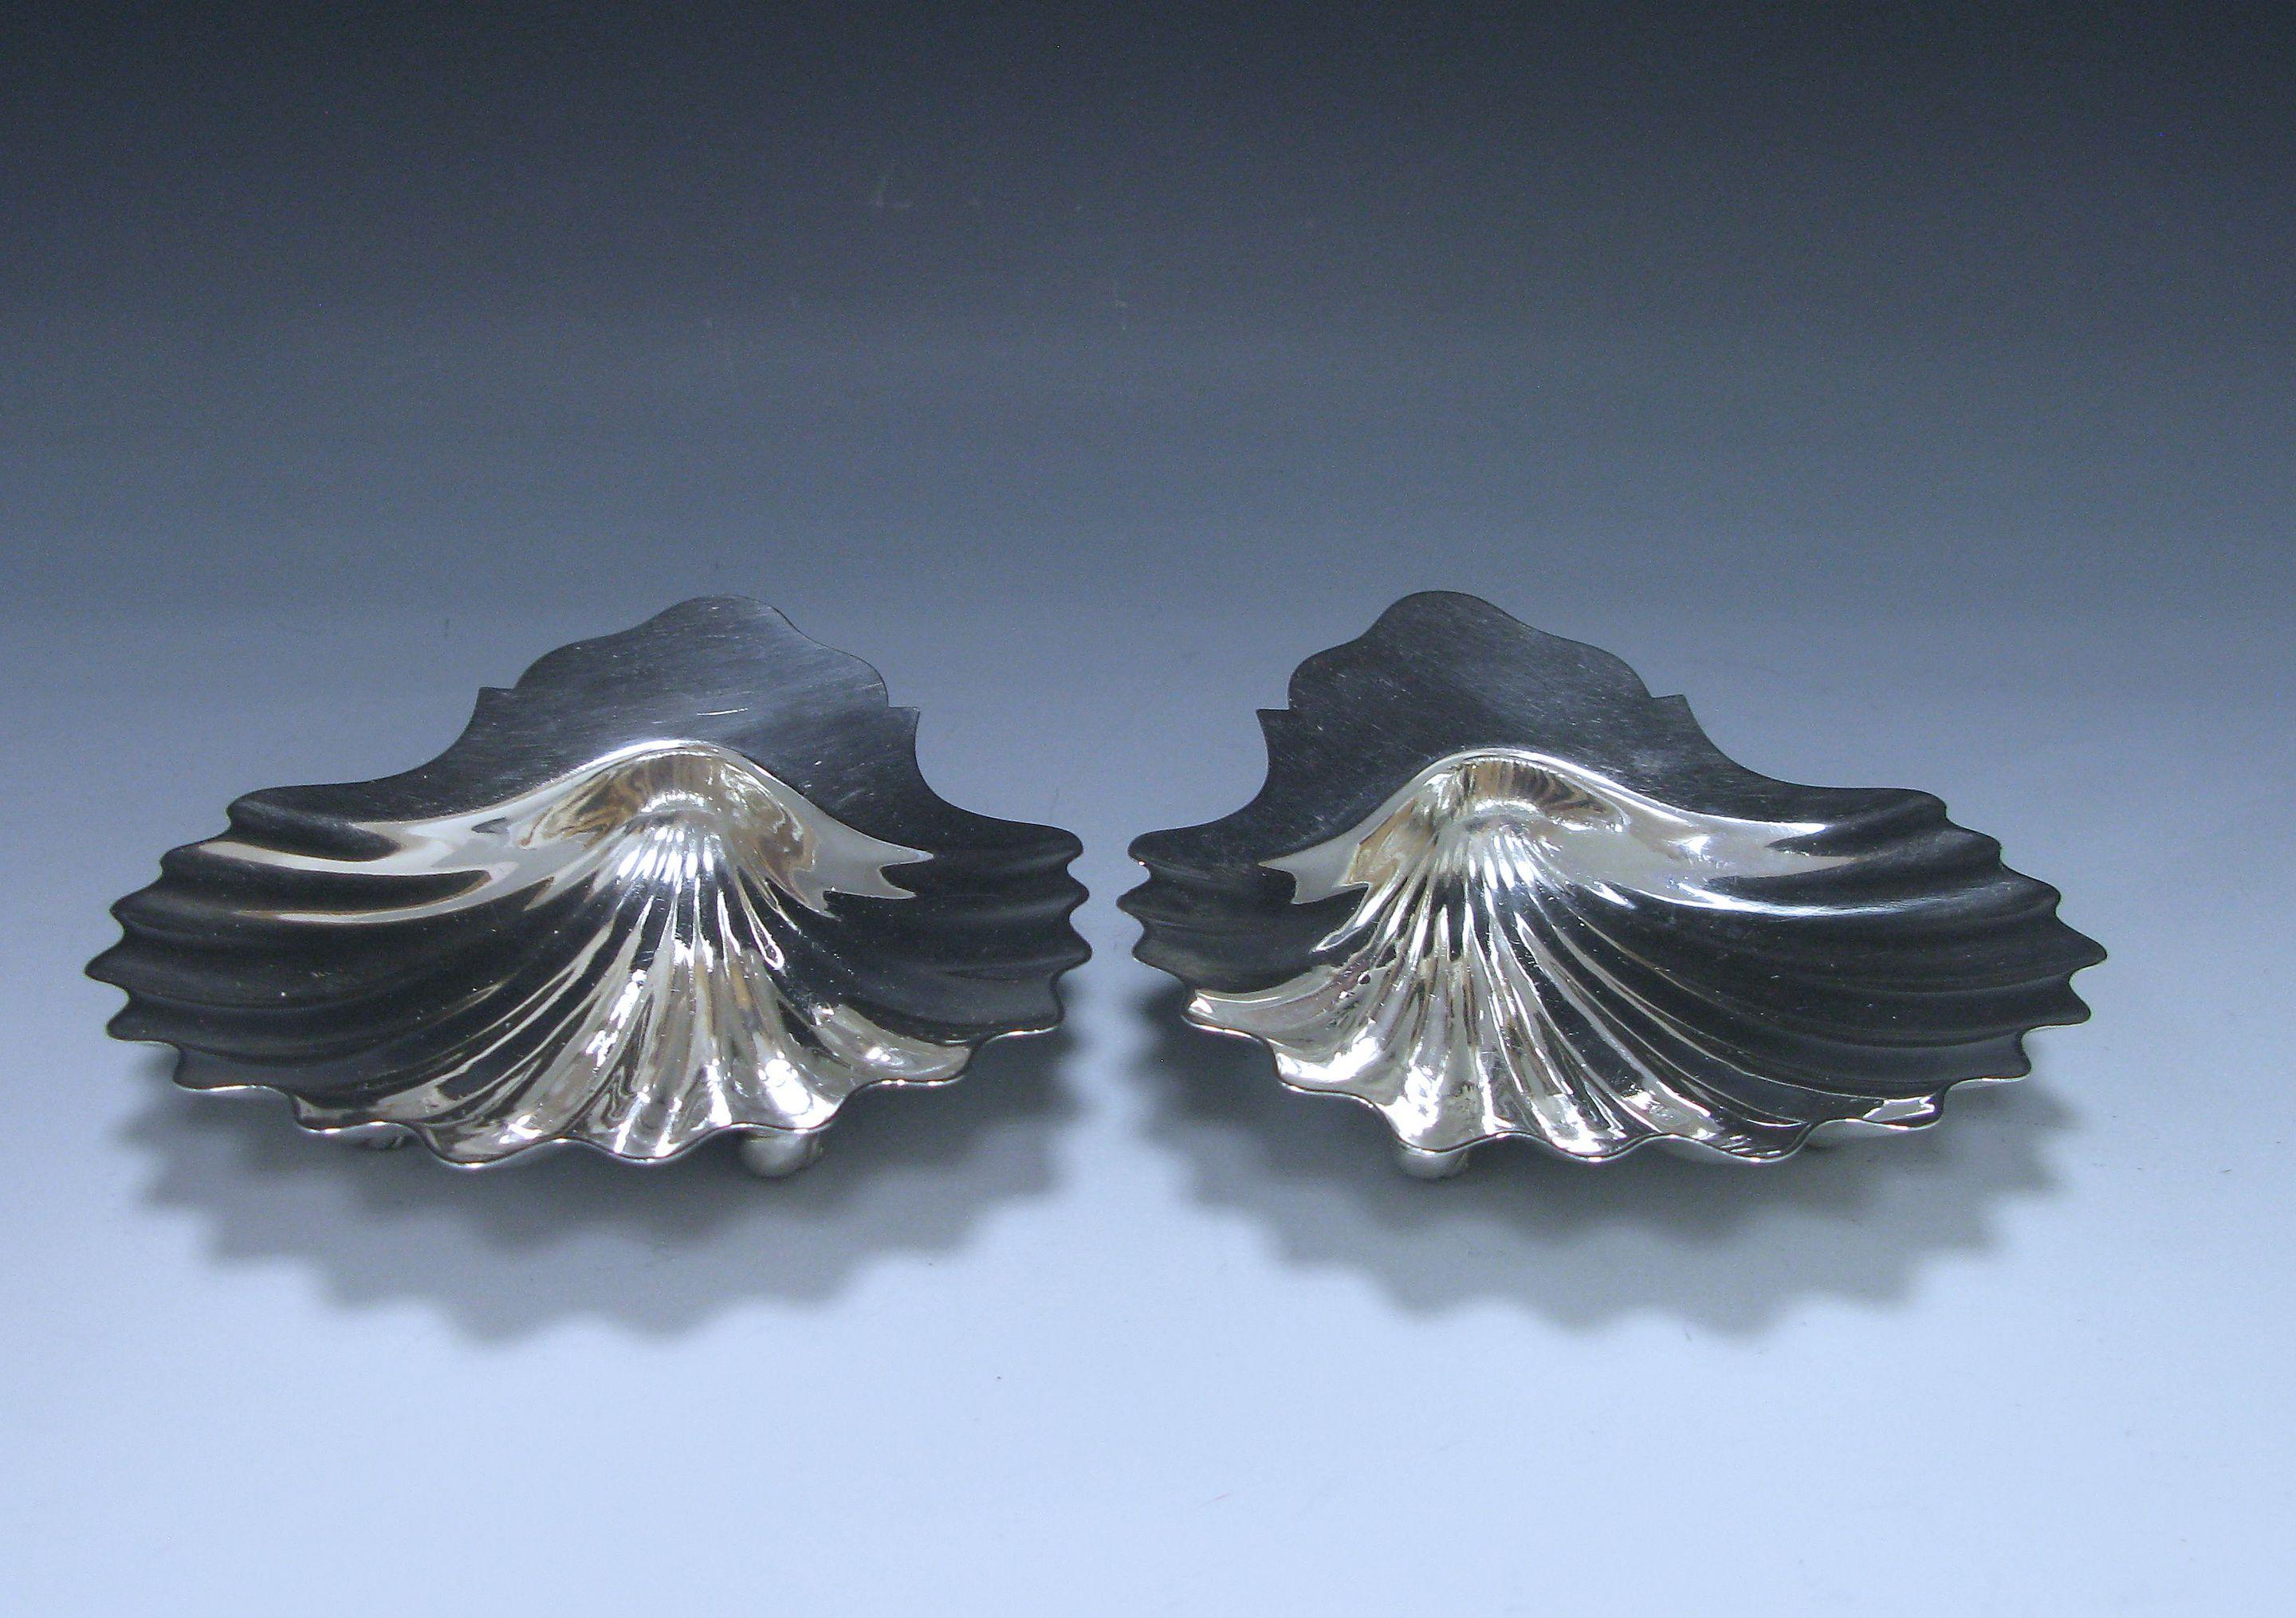 An elegant pair of antique George III sterling silver butter shells in the traditional shell form. The dishes are supported by three nautilus feet, combined weight 6.6 troy oz.